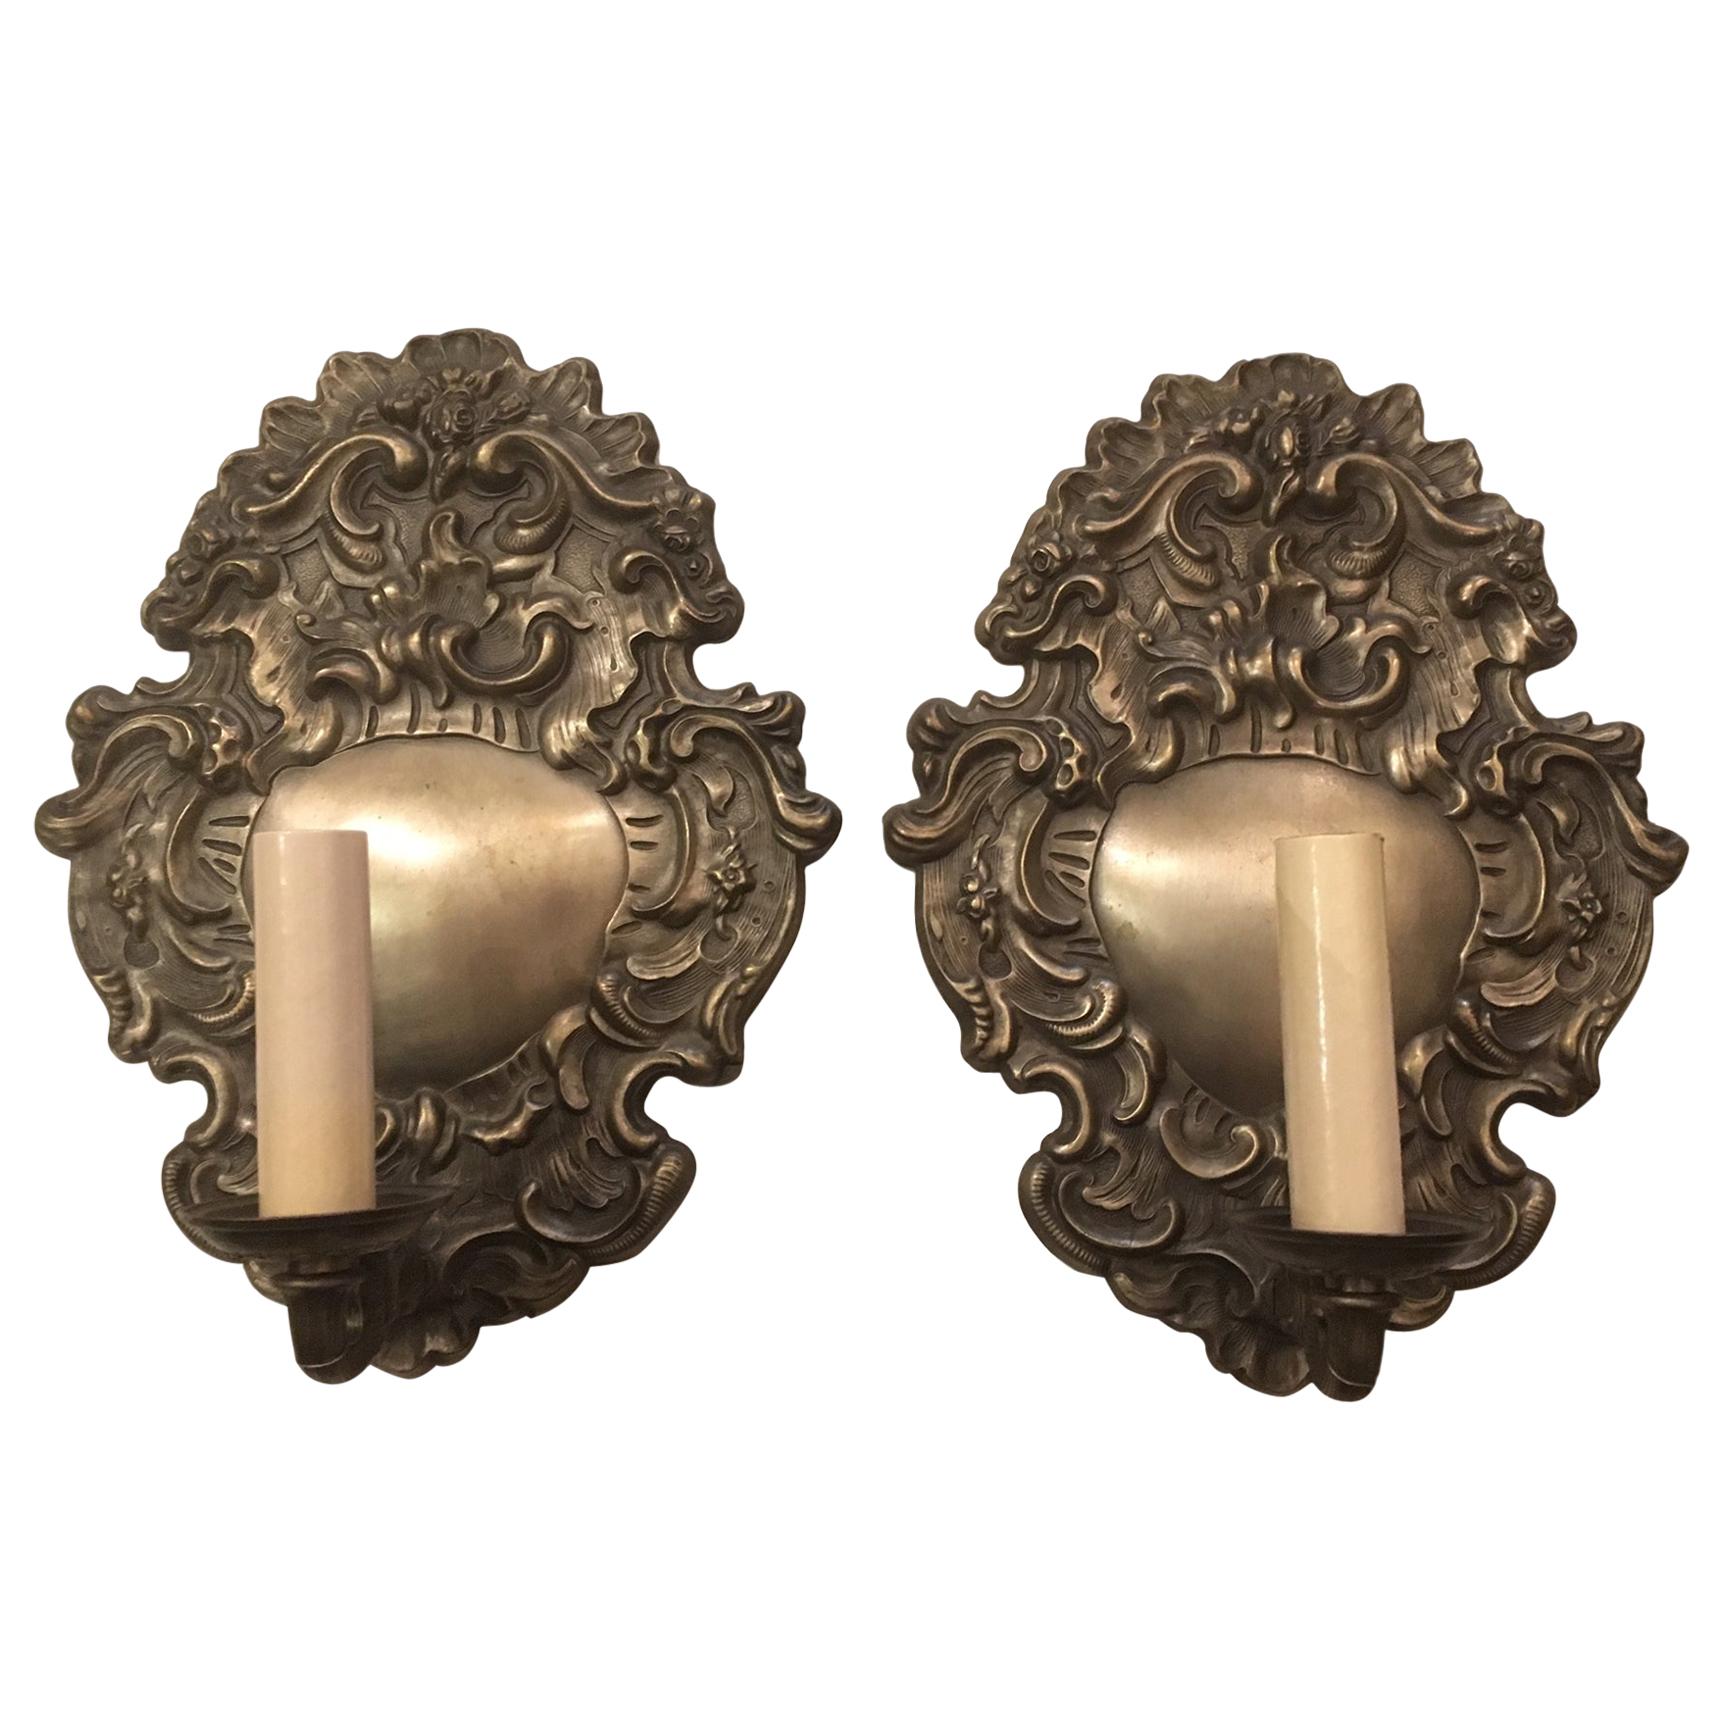 Silver Plated Single Light Sconces